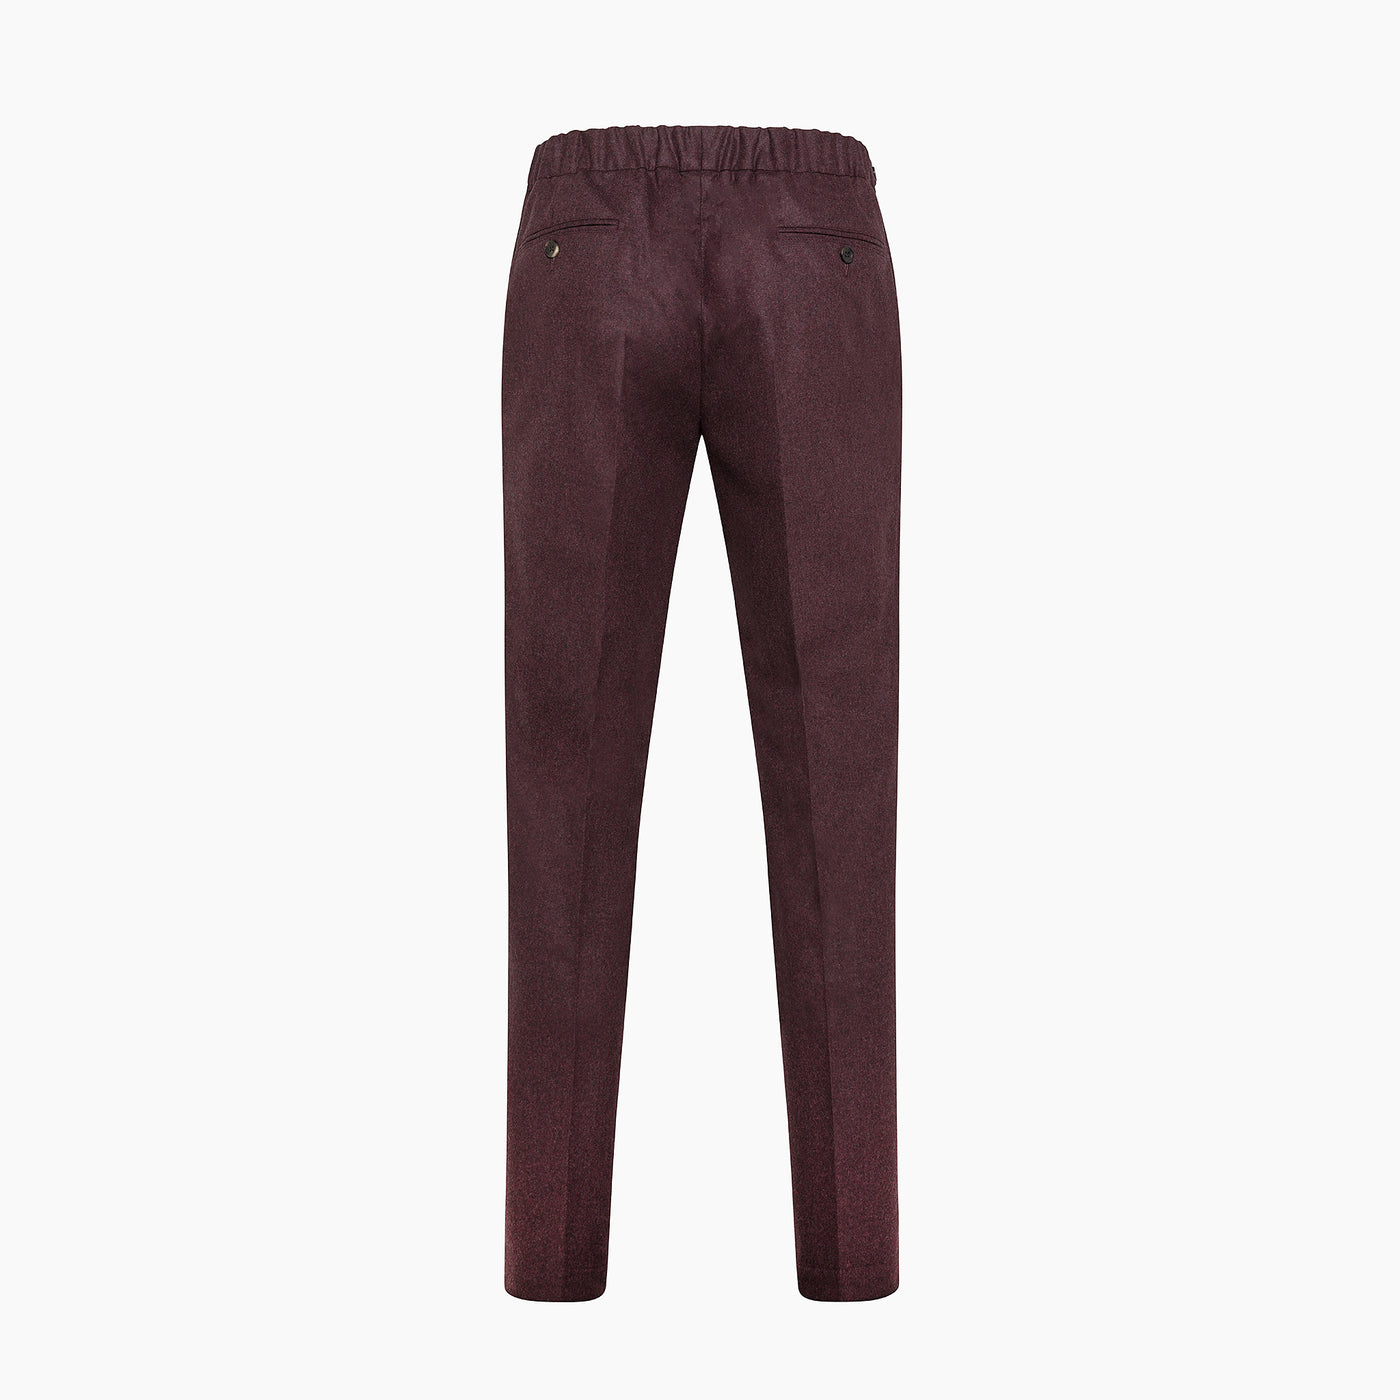 Vince easy pants Luxury Wool Cashmere Flannel